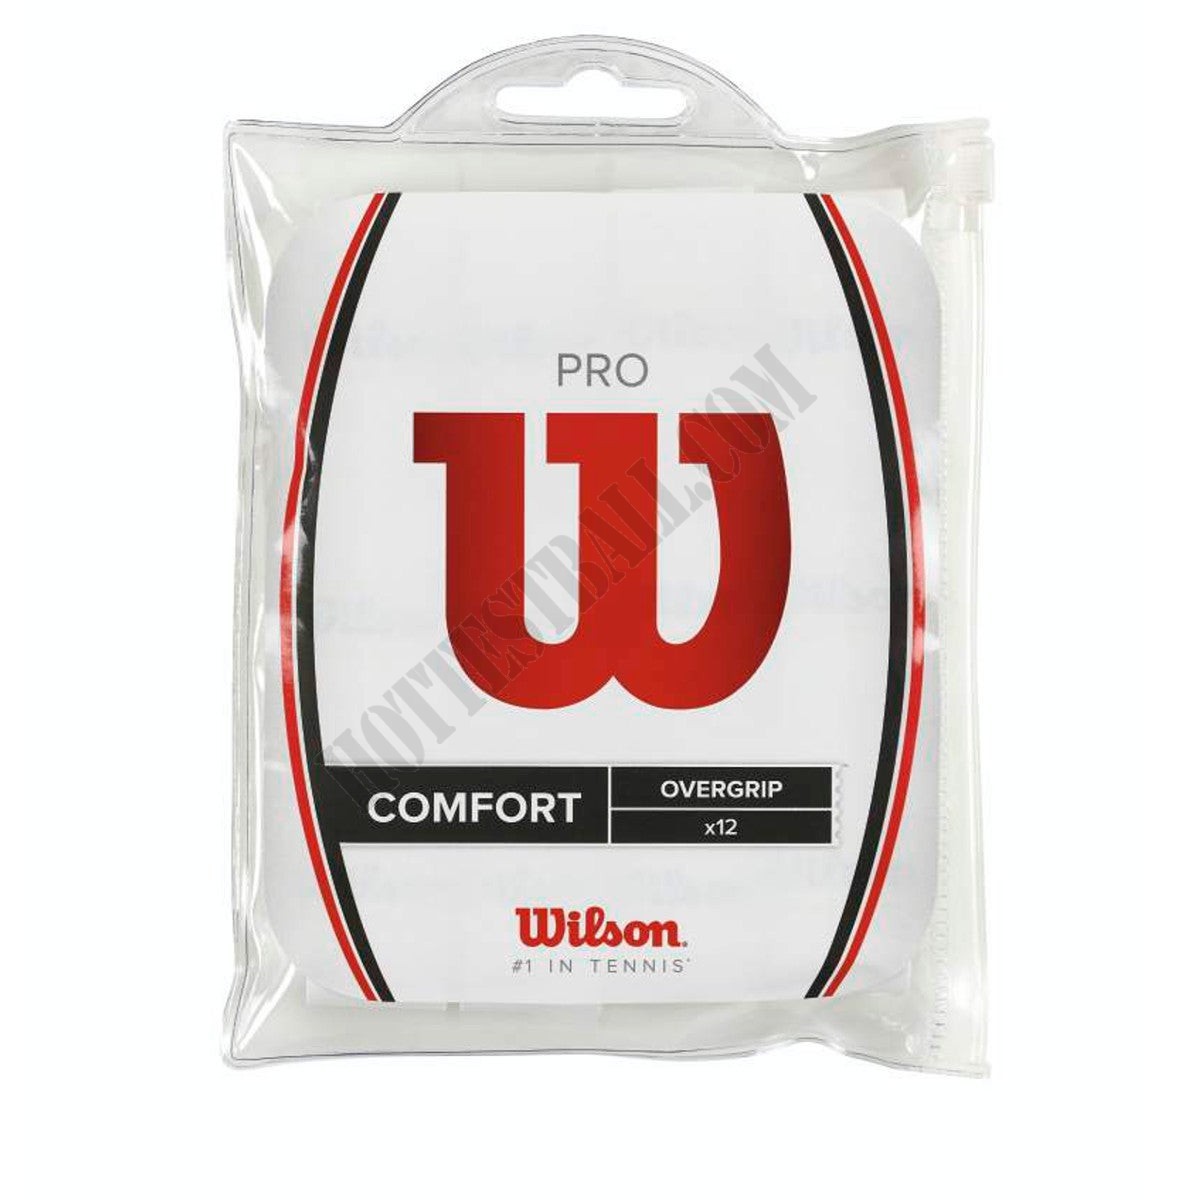 Pro Overgrip White - 12 Pack - Wilson Discount Store - -0